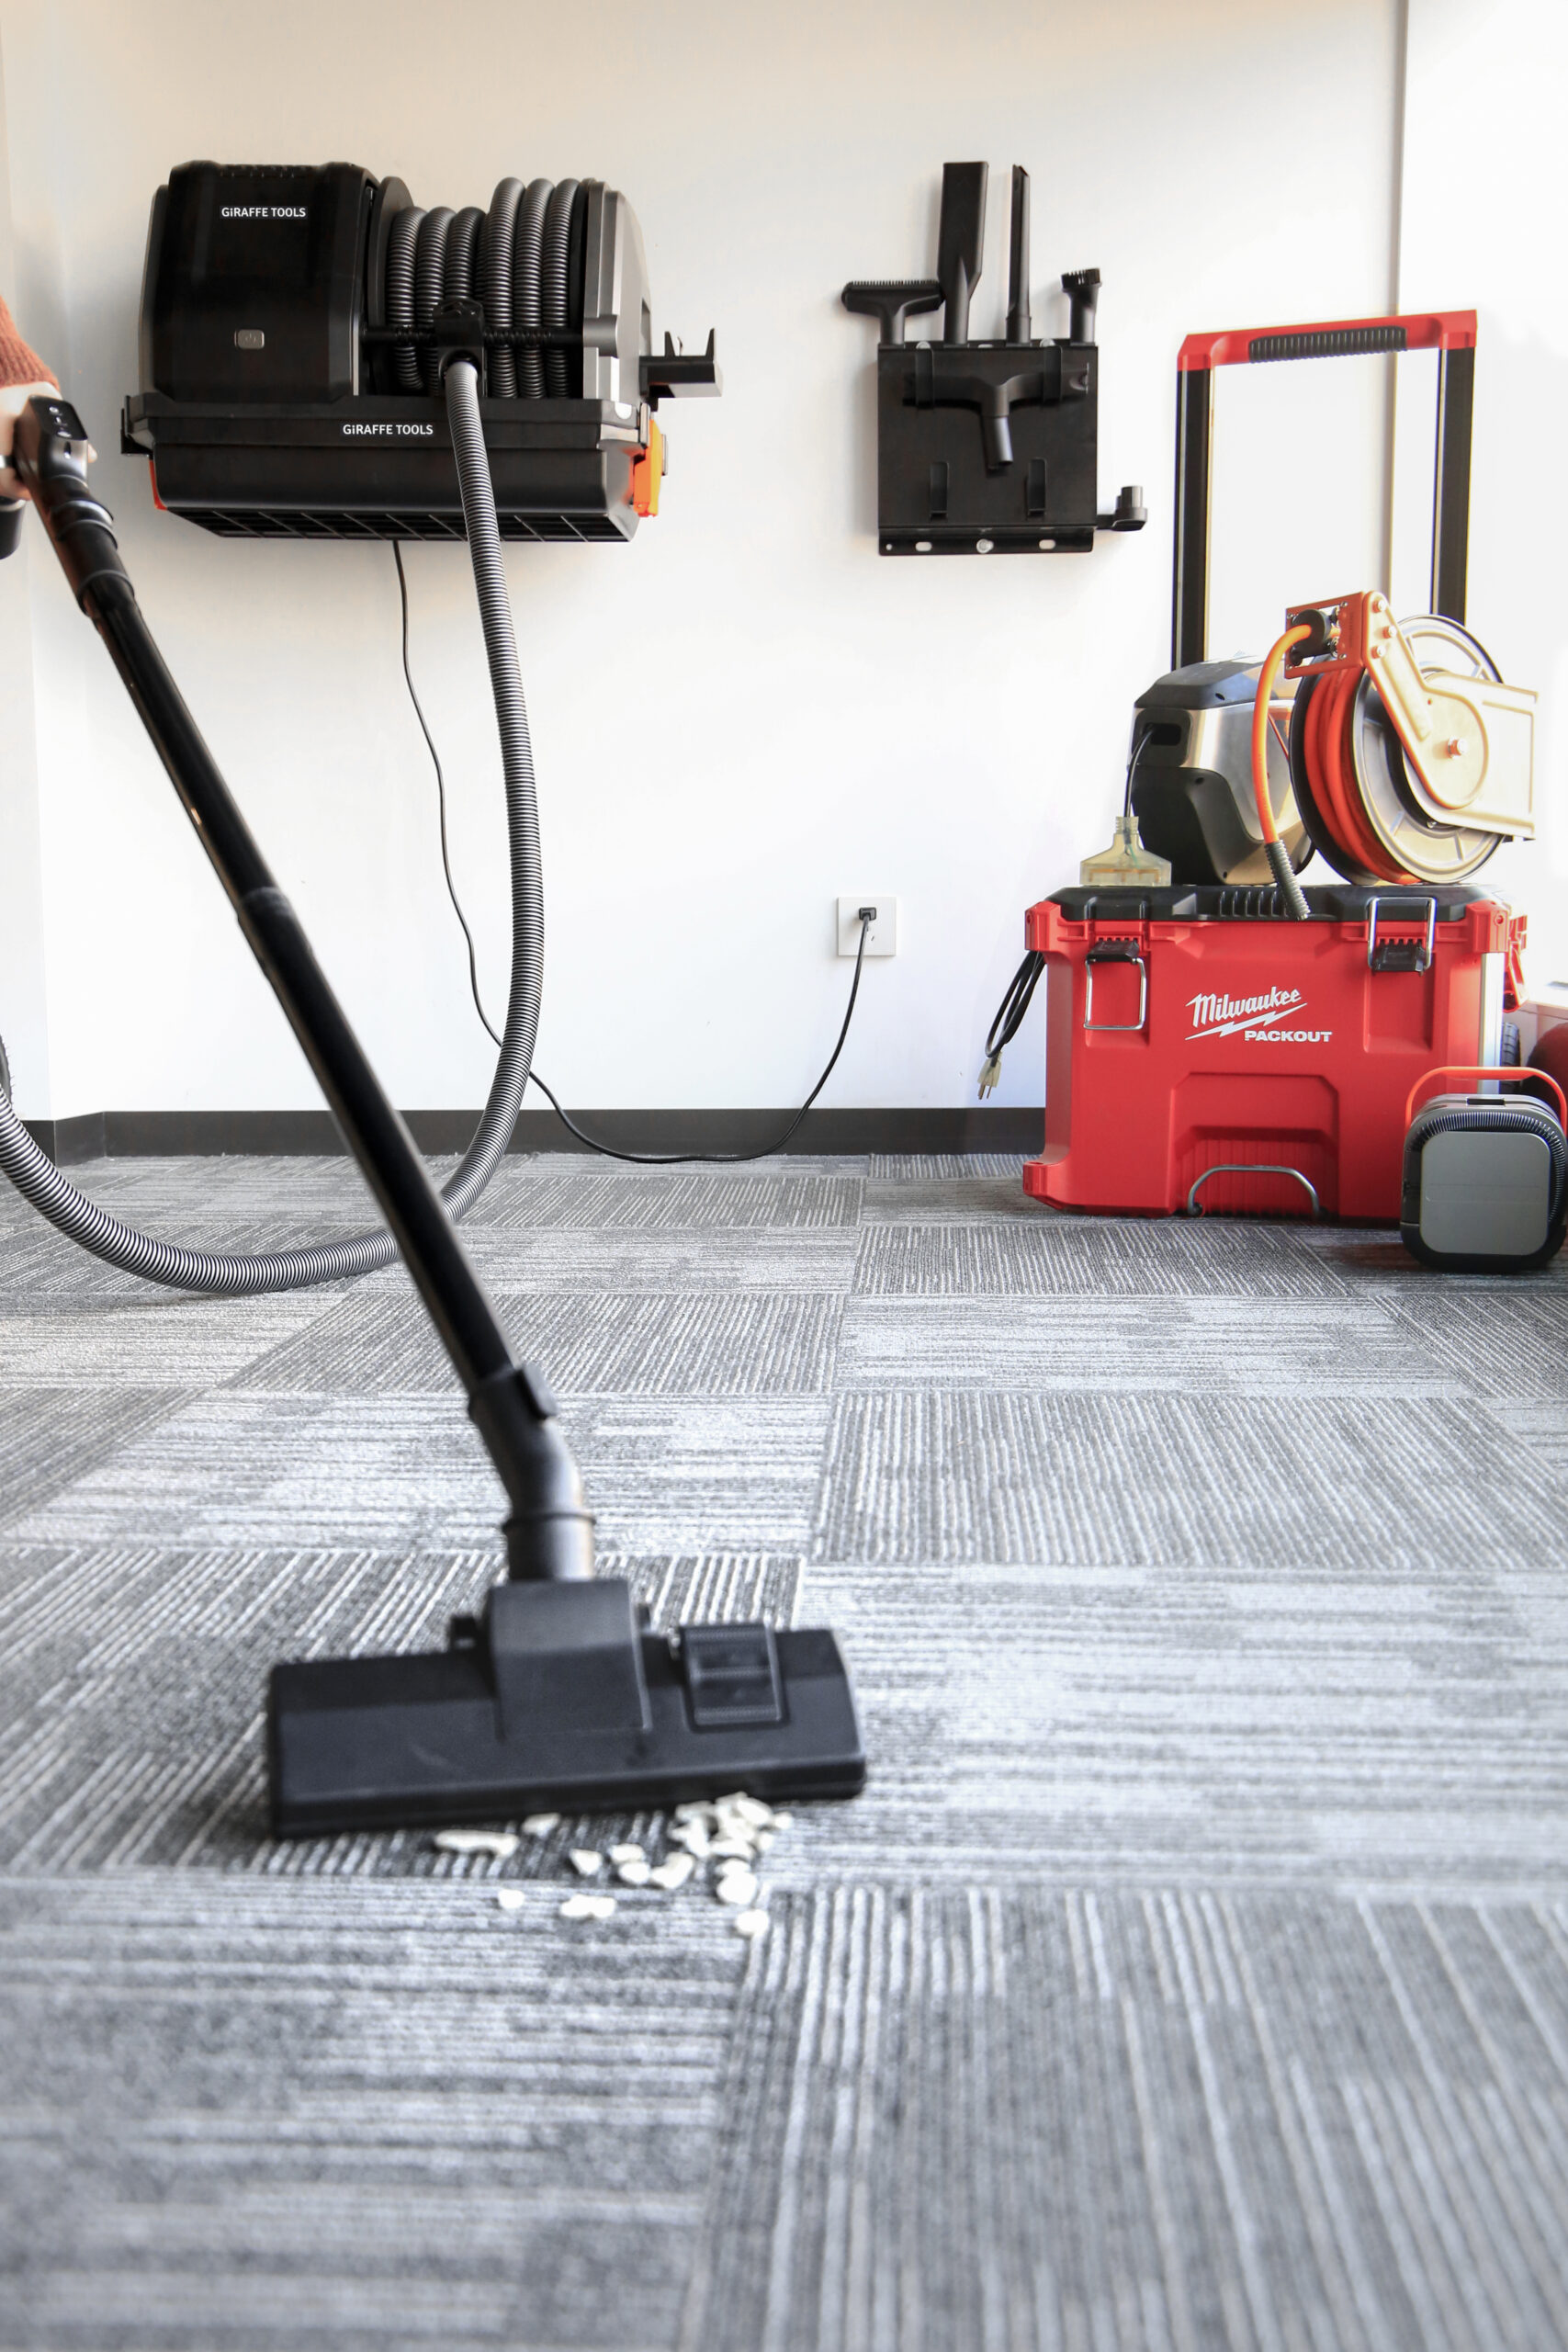 DIY Installation Guide for Wall-Mounted Garage Vacuums